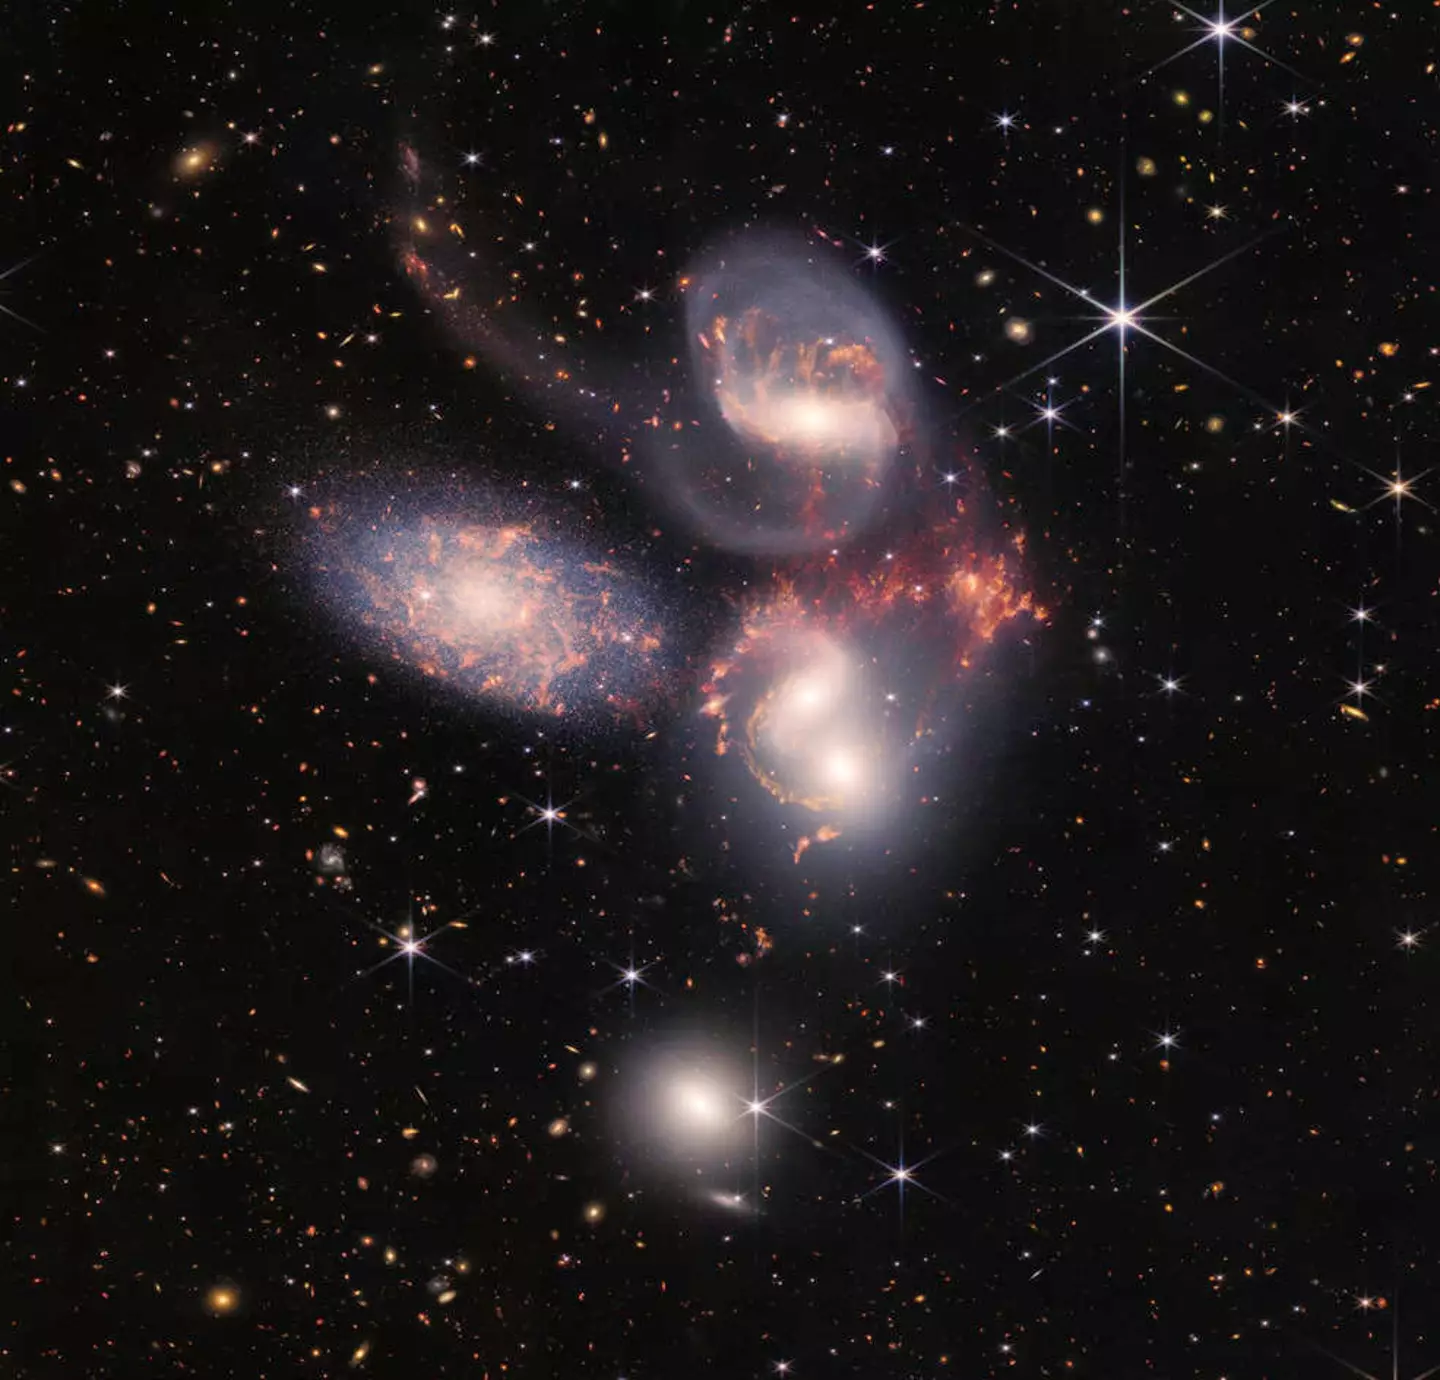 An image of Stephan's Quintet taken by the James Webb Space Telescope.